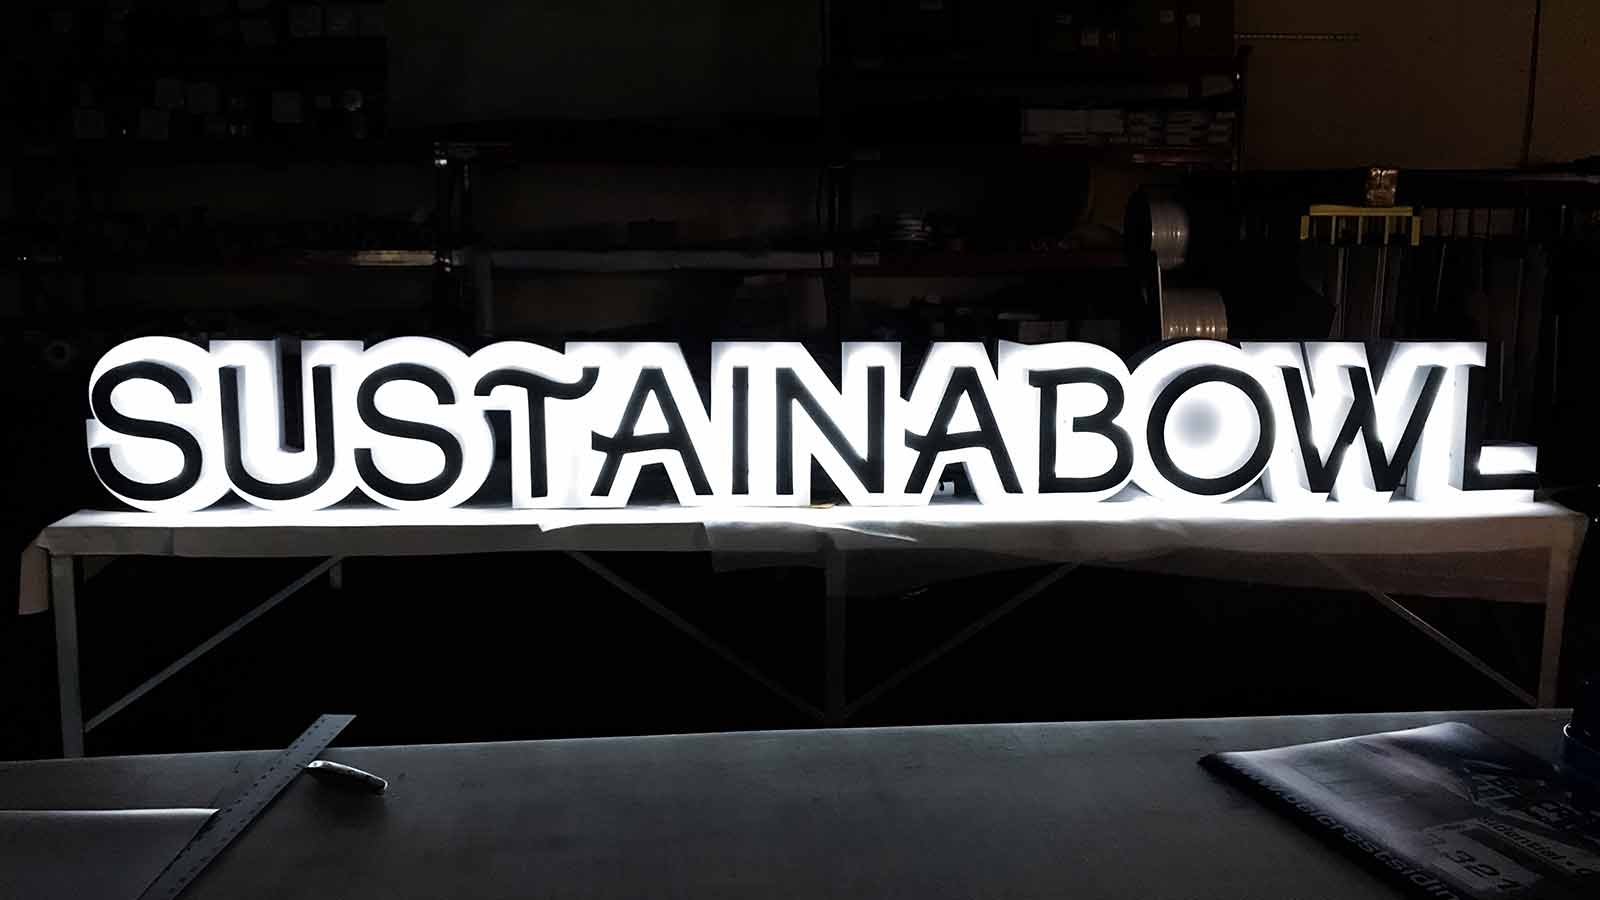 sustainabowl backlit channel letters